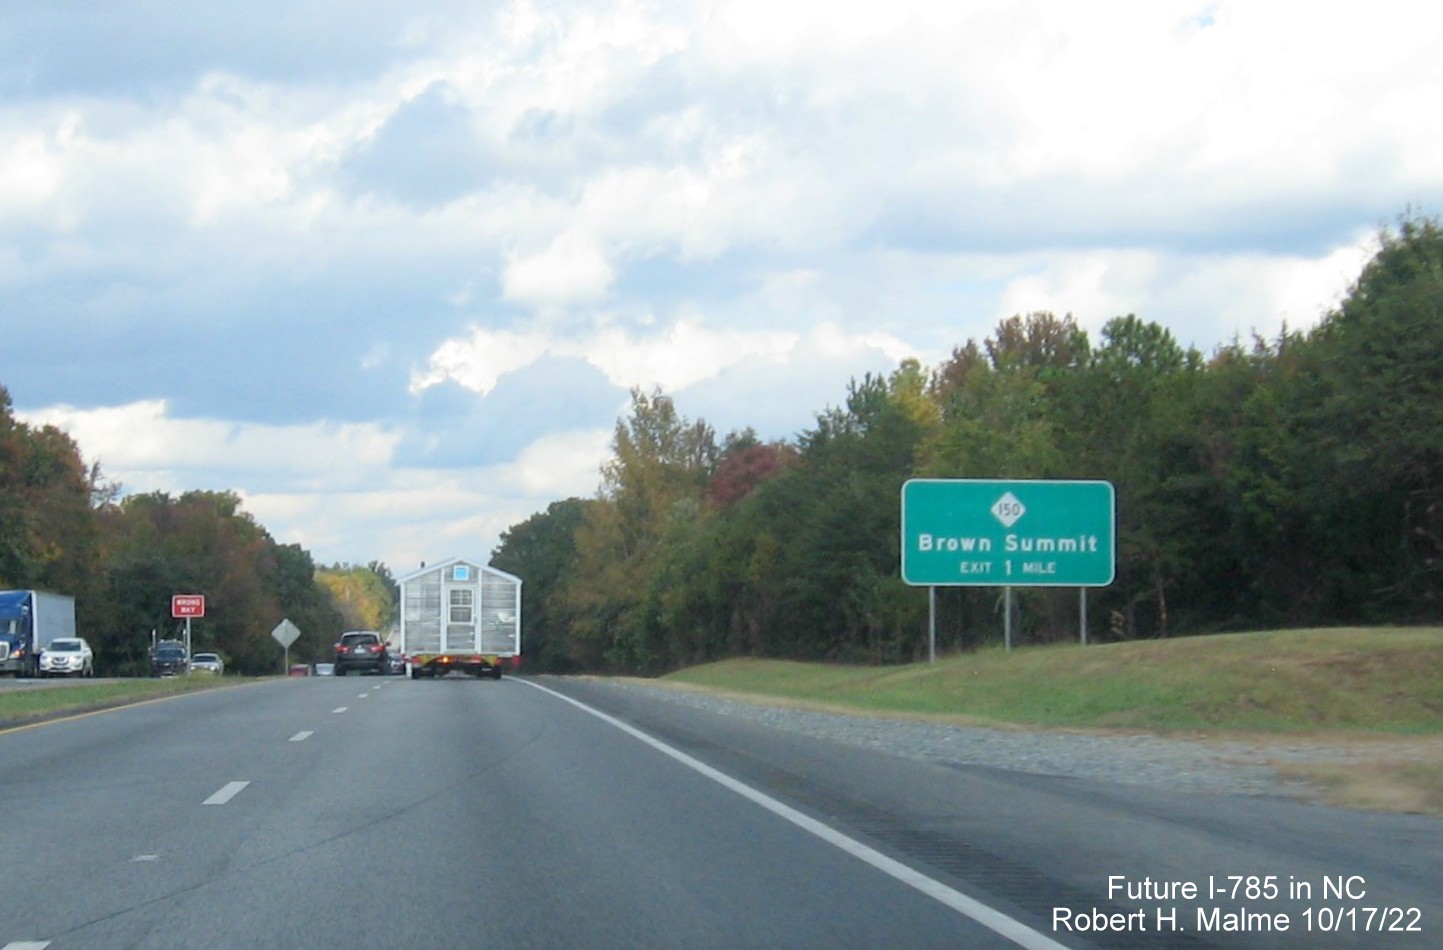 Image of 1 mile advance sign for NC 150 exit on US 29 North in Brown Summit, October 2022